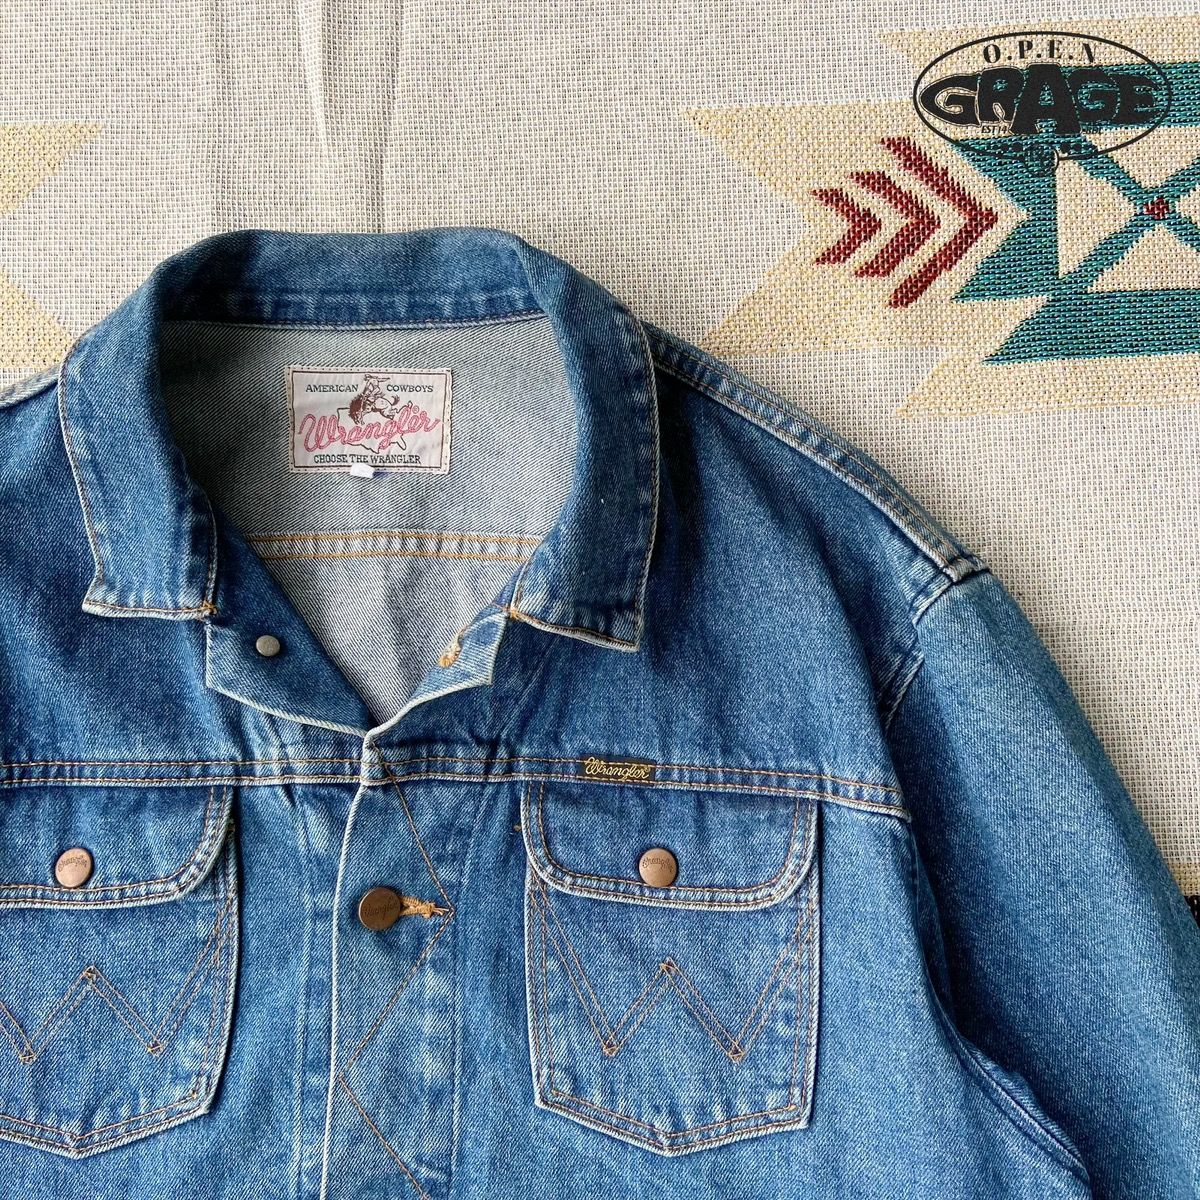 Archival Clothing - Collectible Classic VTG Wrangler Jean Jacket Worn by Icons - 3